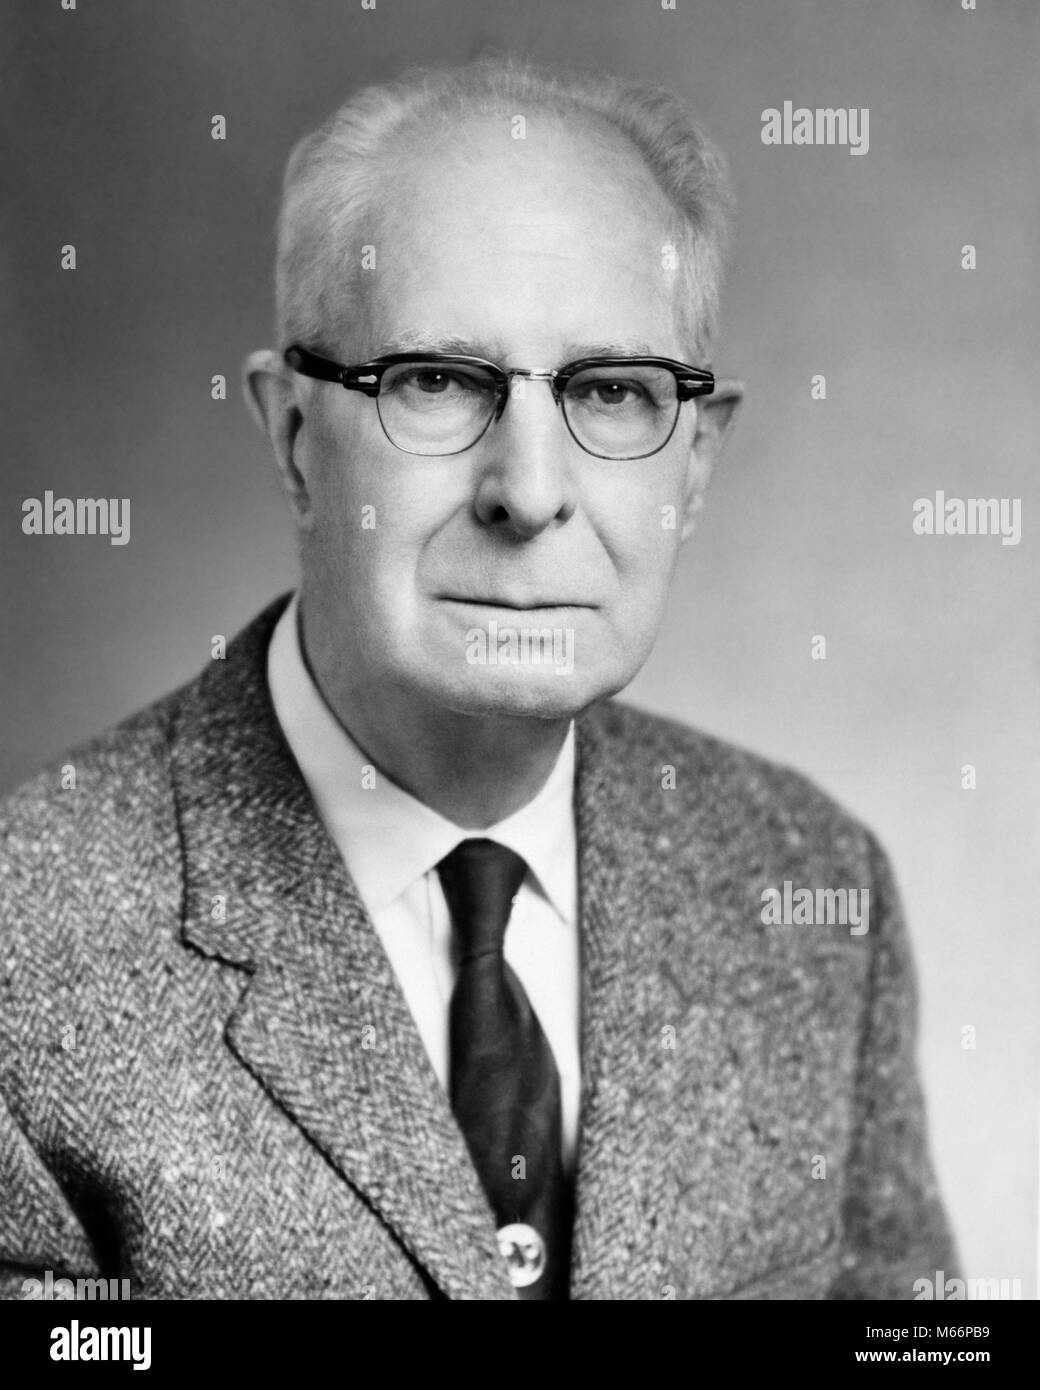 1960s PORTRAIT OF SERIOUS GRIM MEAN UNSMILING SENIOR MAN WEARING GLASSES LOOKING AT CAMERA - q68111 CPC001 HARS STERN ELDERS GRIM MALES SOMBER B&W BLACK AND WHITE CAUCASIAN ETHNICITY CHARLES PHELPS CUSHING DOUR HUMORLESS LOOKING AT CAMERA OLD FASHIONED PERSONS POKER FACE POKER-FACED SOBER STONE FACE STONE-FACED UNSMILING Stock Photo